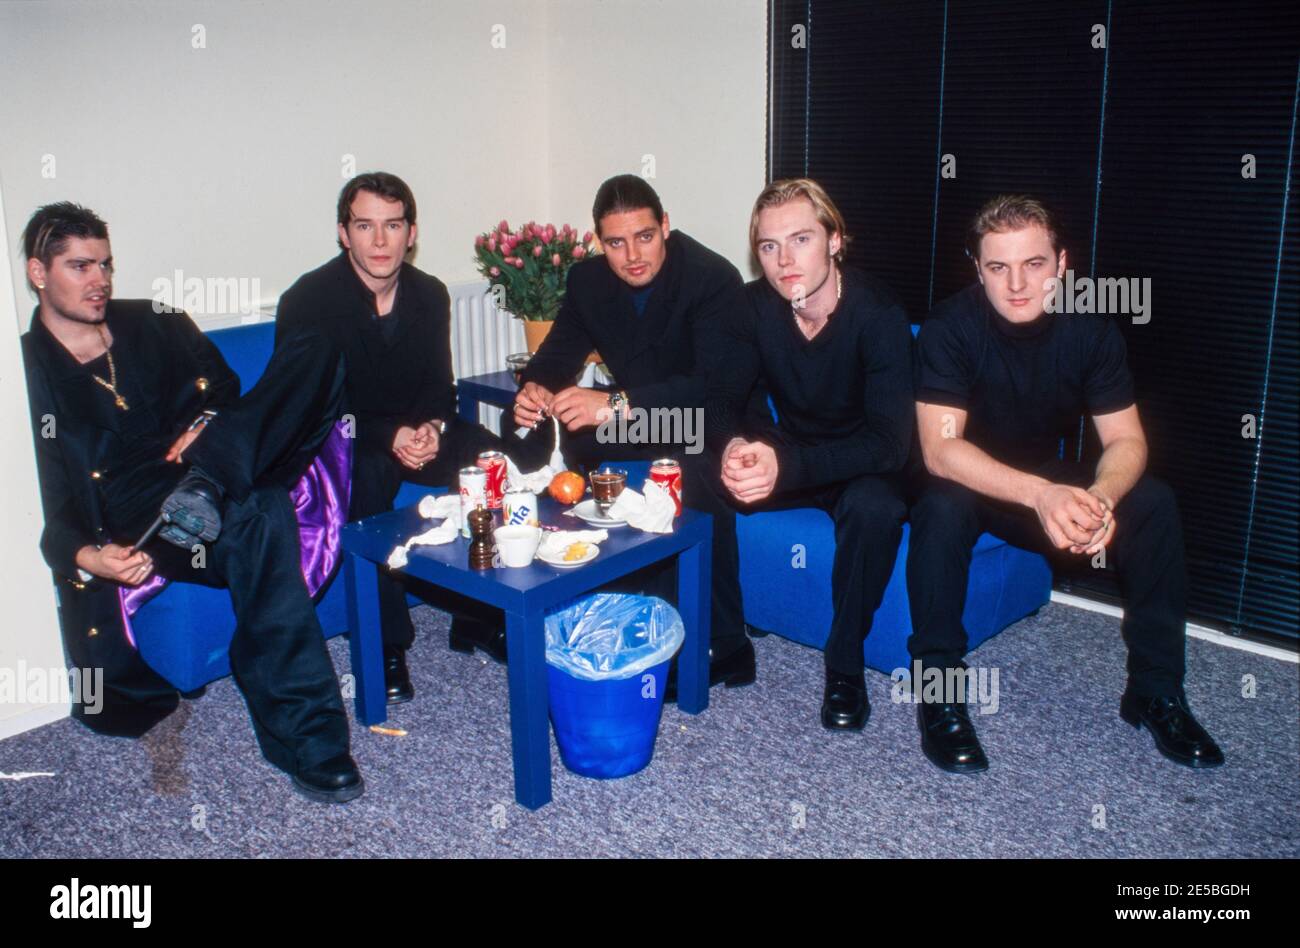 AMSTERDAM, NETHERLANDS - MAY 26, 1998: Boyzone was an Irish boyband with leadsinger Ronan Keating. Here they are waiting in a dressing room. Stock Photo